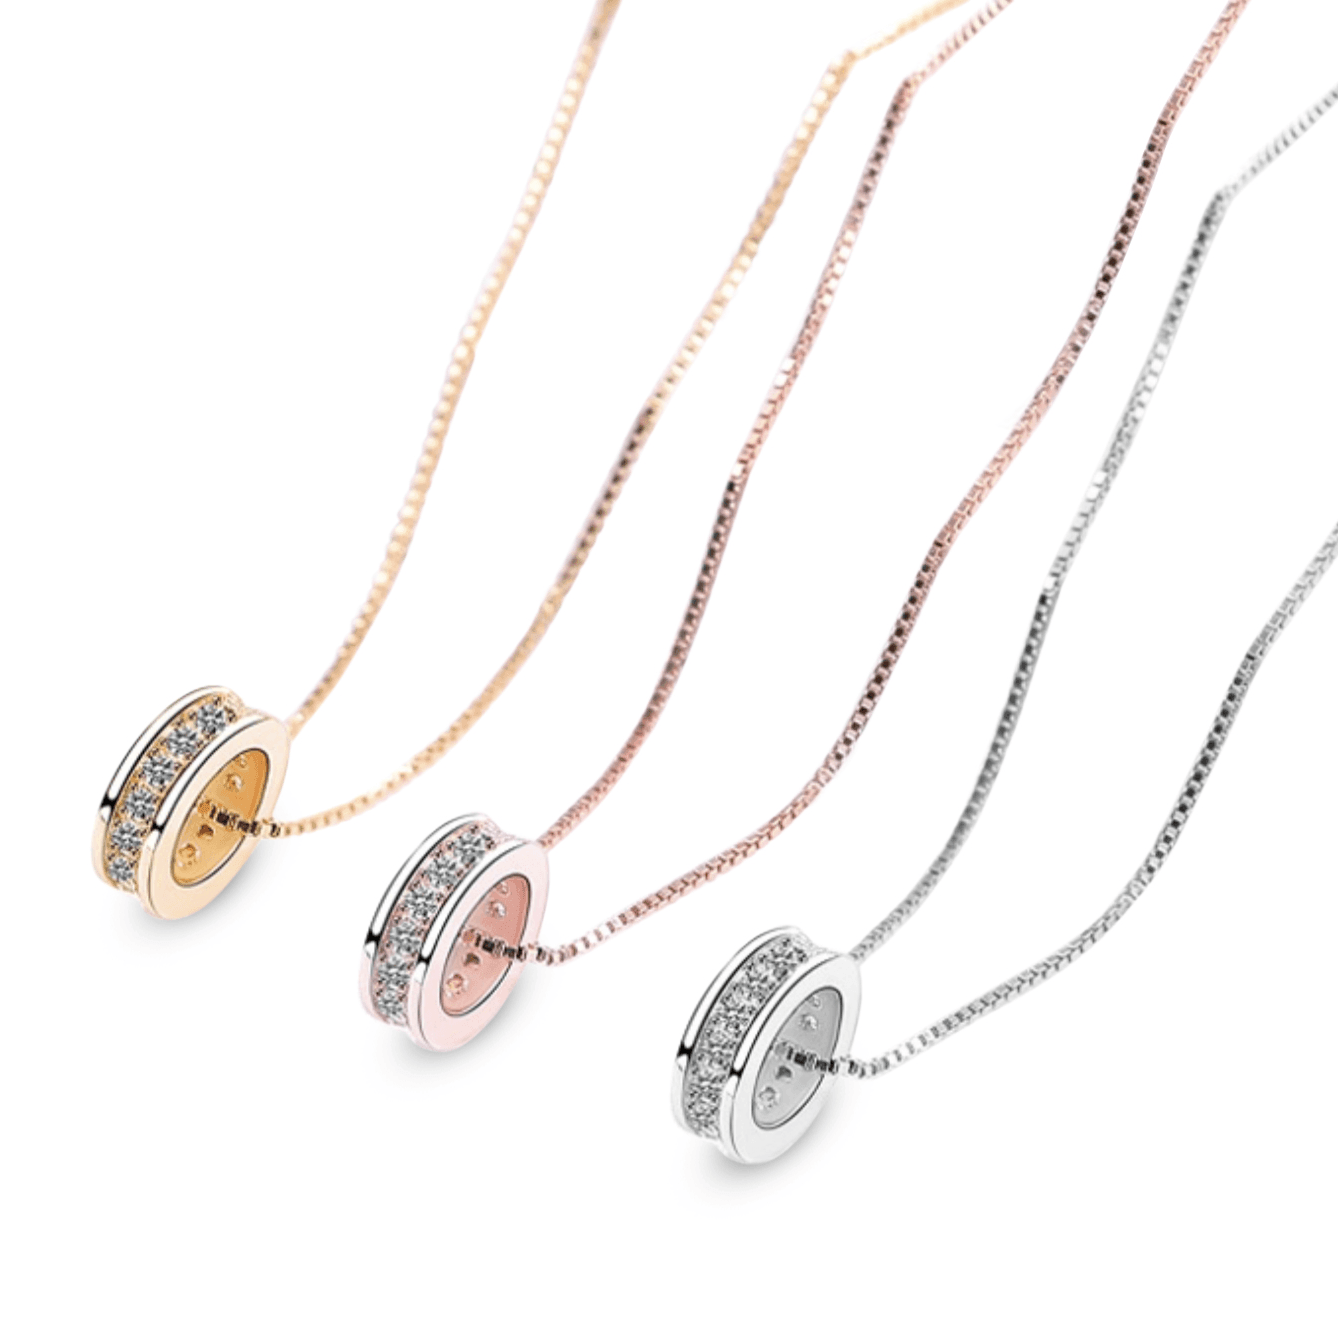 Silver Necklace Pendant with a hint of Sparkle. Gold, Silver or Rose Gold Sterling Silver Classic and minimalistic chain design with a brilliant cubic zirconia 